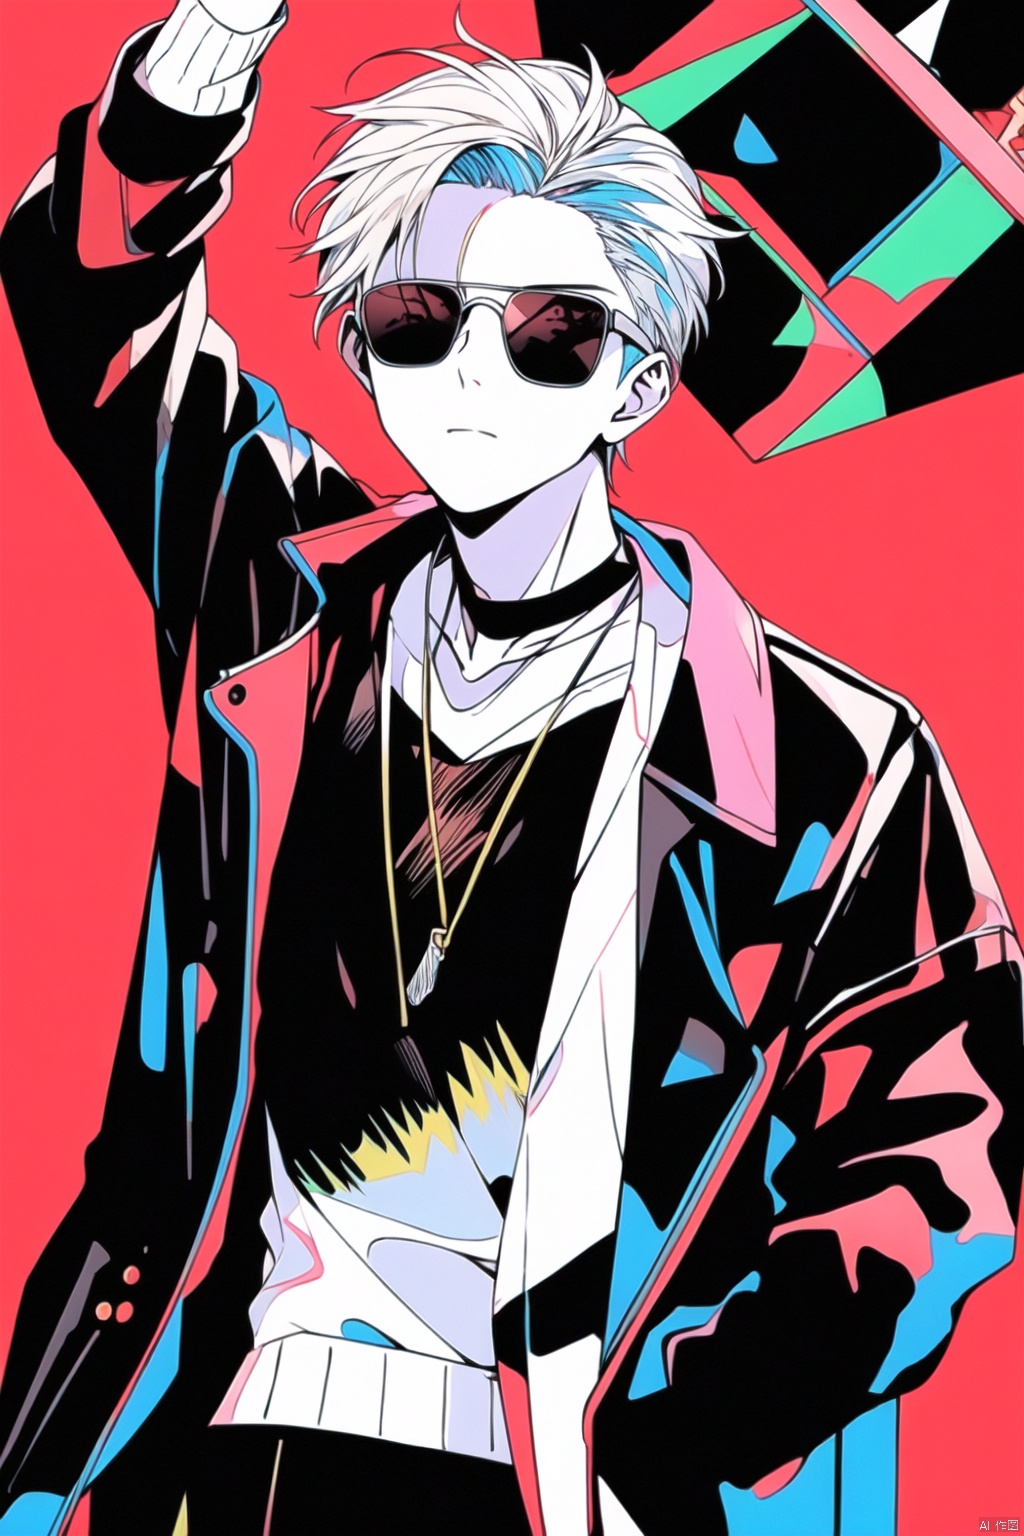  //
( code background), (data background,:1.2),
//
multicolored_background,red and white background,sam yang, (1boy:1.3), (short white hair,hair slicked back,:1.2)black sunglasses, expressionless,cowboy shot, no_eyes,(colored inner hair, colored_tips,:1.2), shota, ink style, Light-electric style, (\shuang hua\), 372089, flat, cozy animation scenes